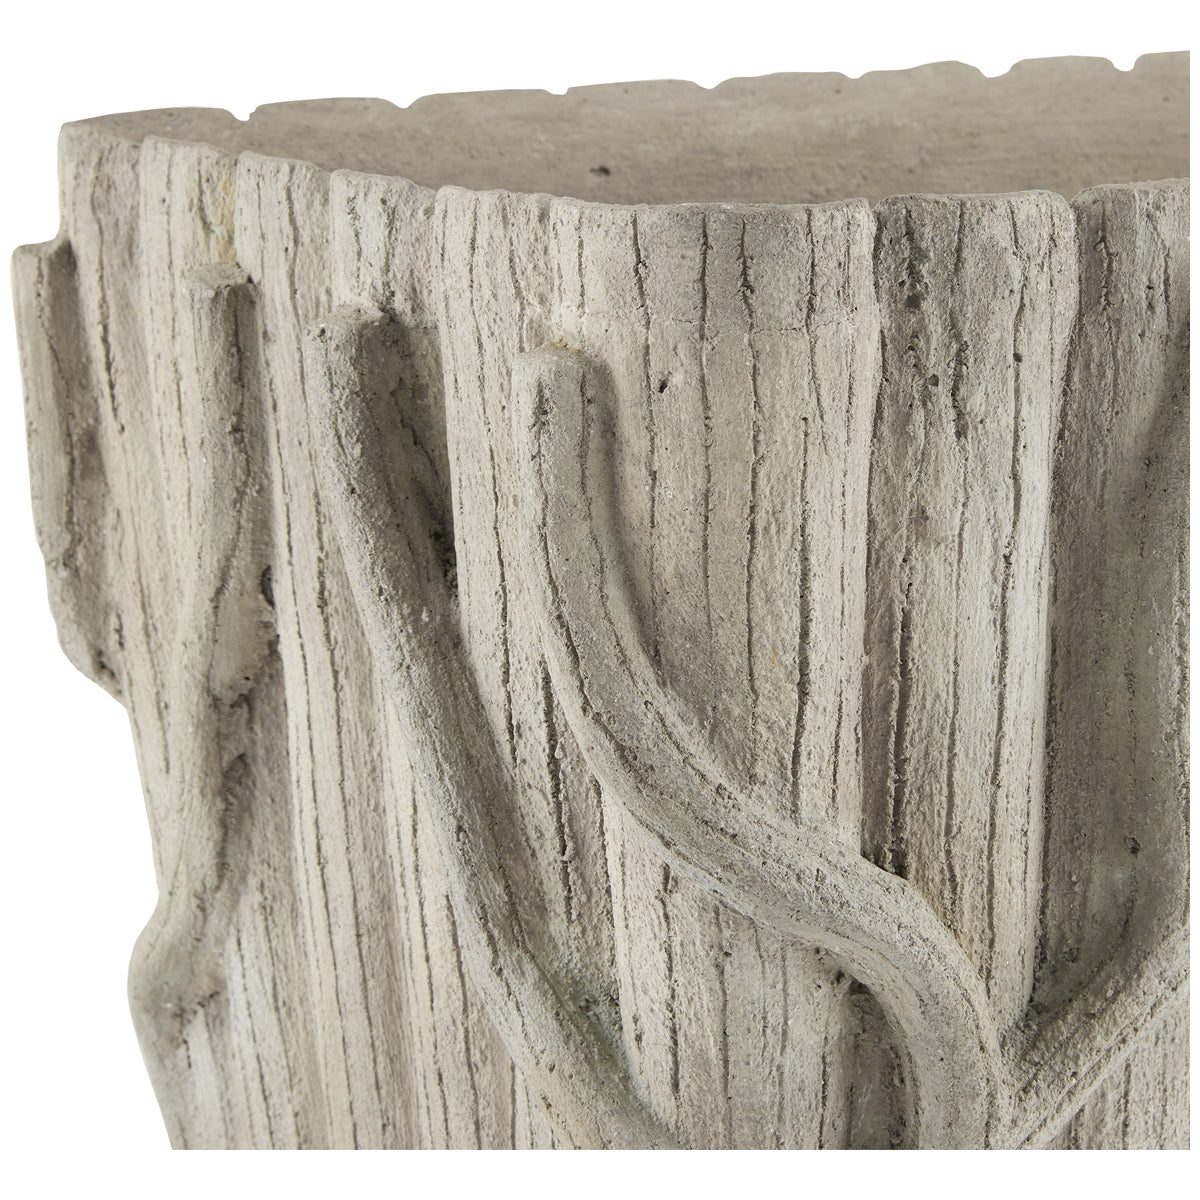 Currey and Company Faux Bois Rectangular Planter